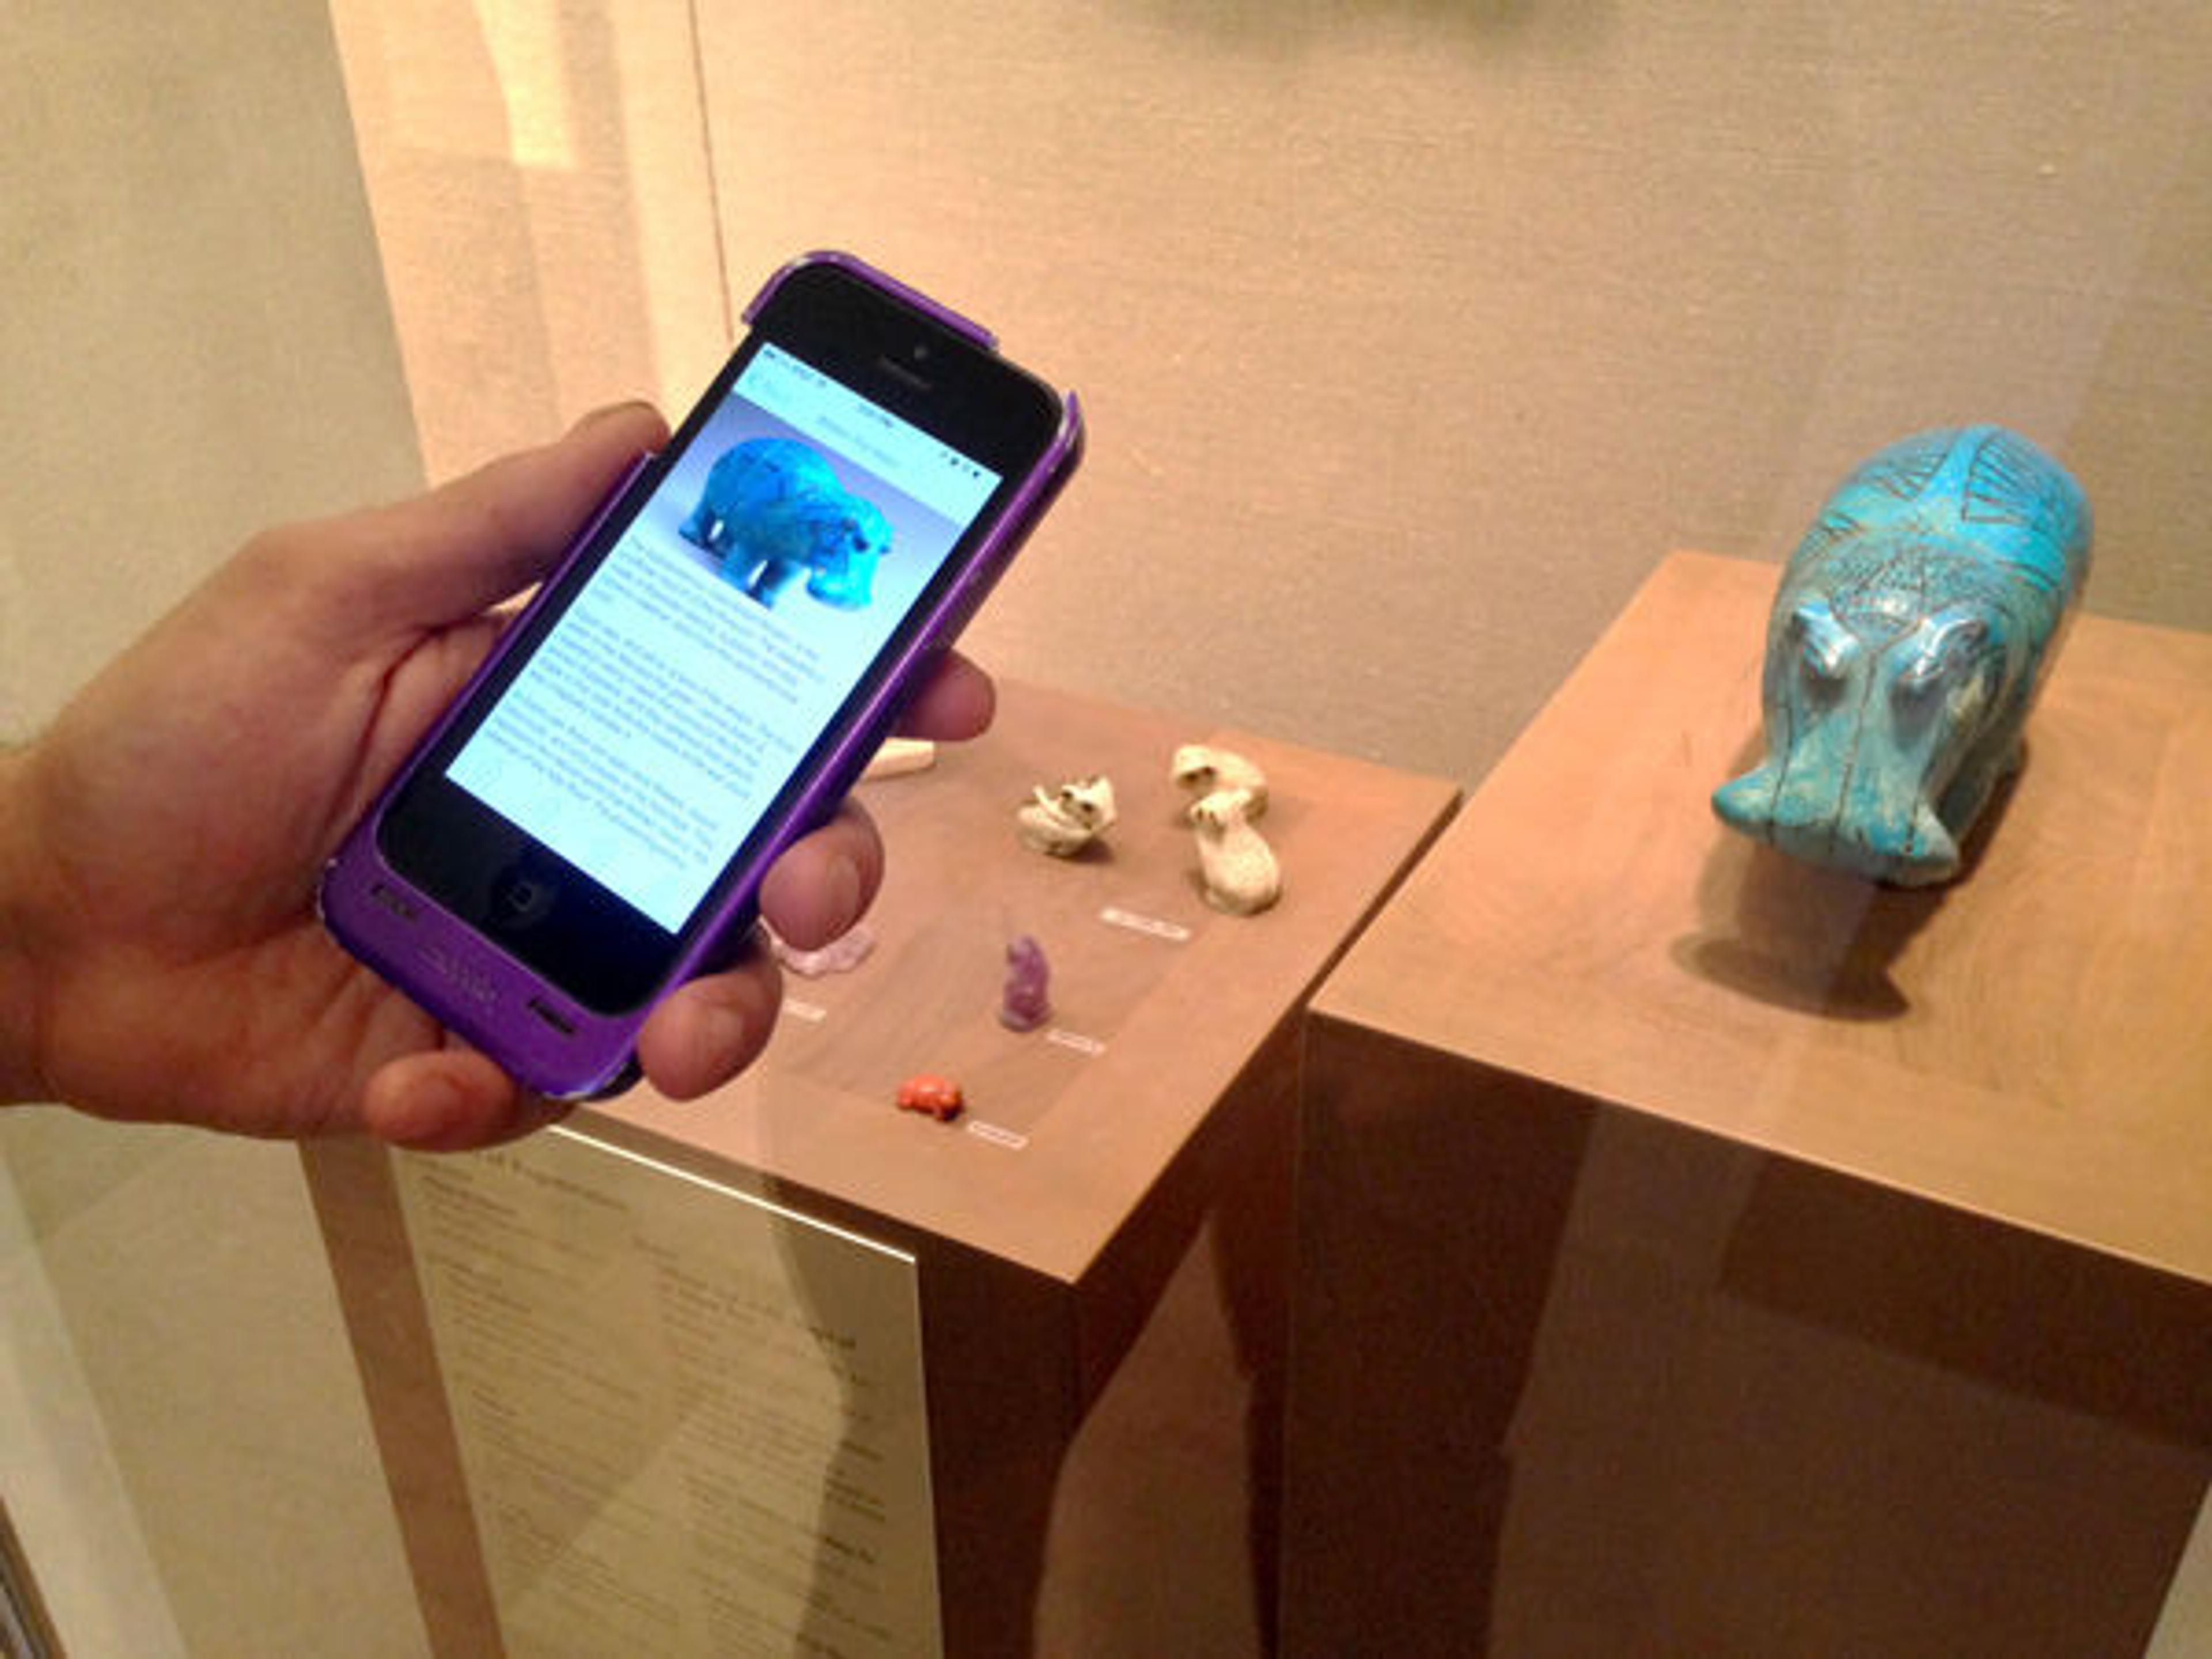 Exploring the galleries of Egyptian art using beacon technology. Photo by Don Undeen